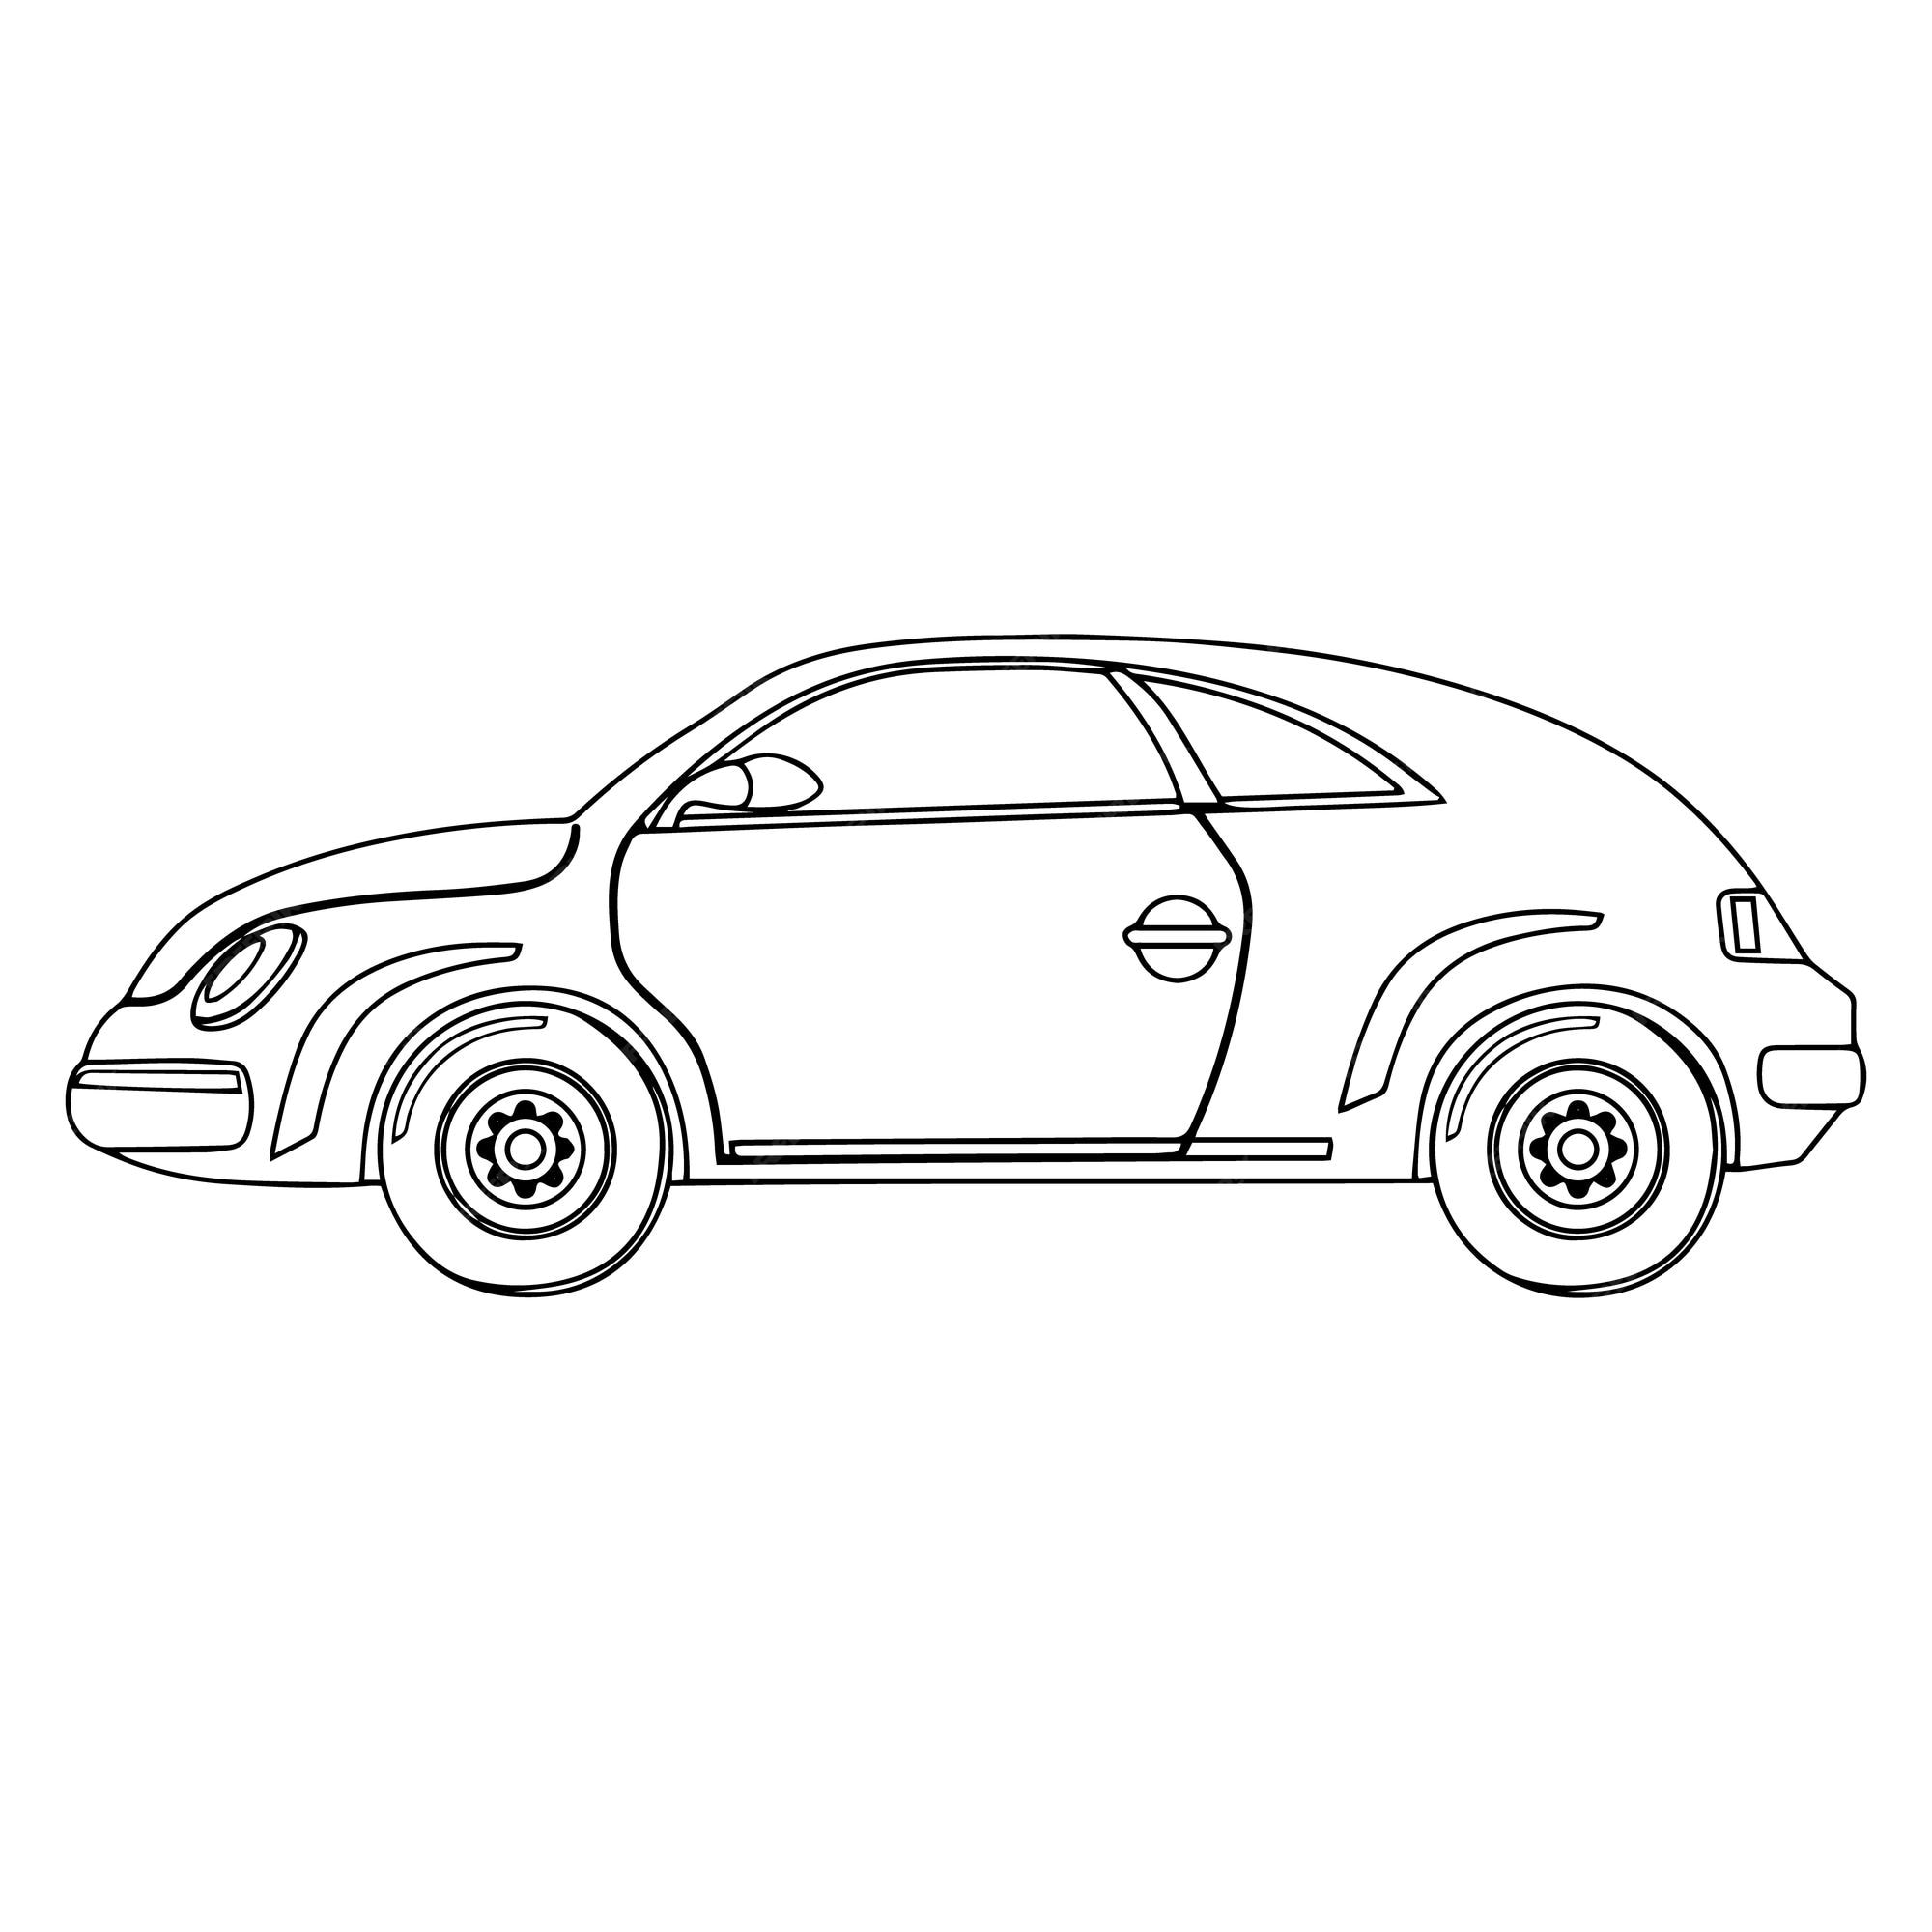 Premium Vector | Coloring page outline of cars vehicles coloring book for  kids